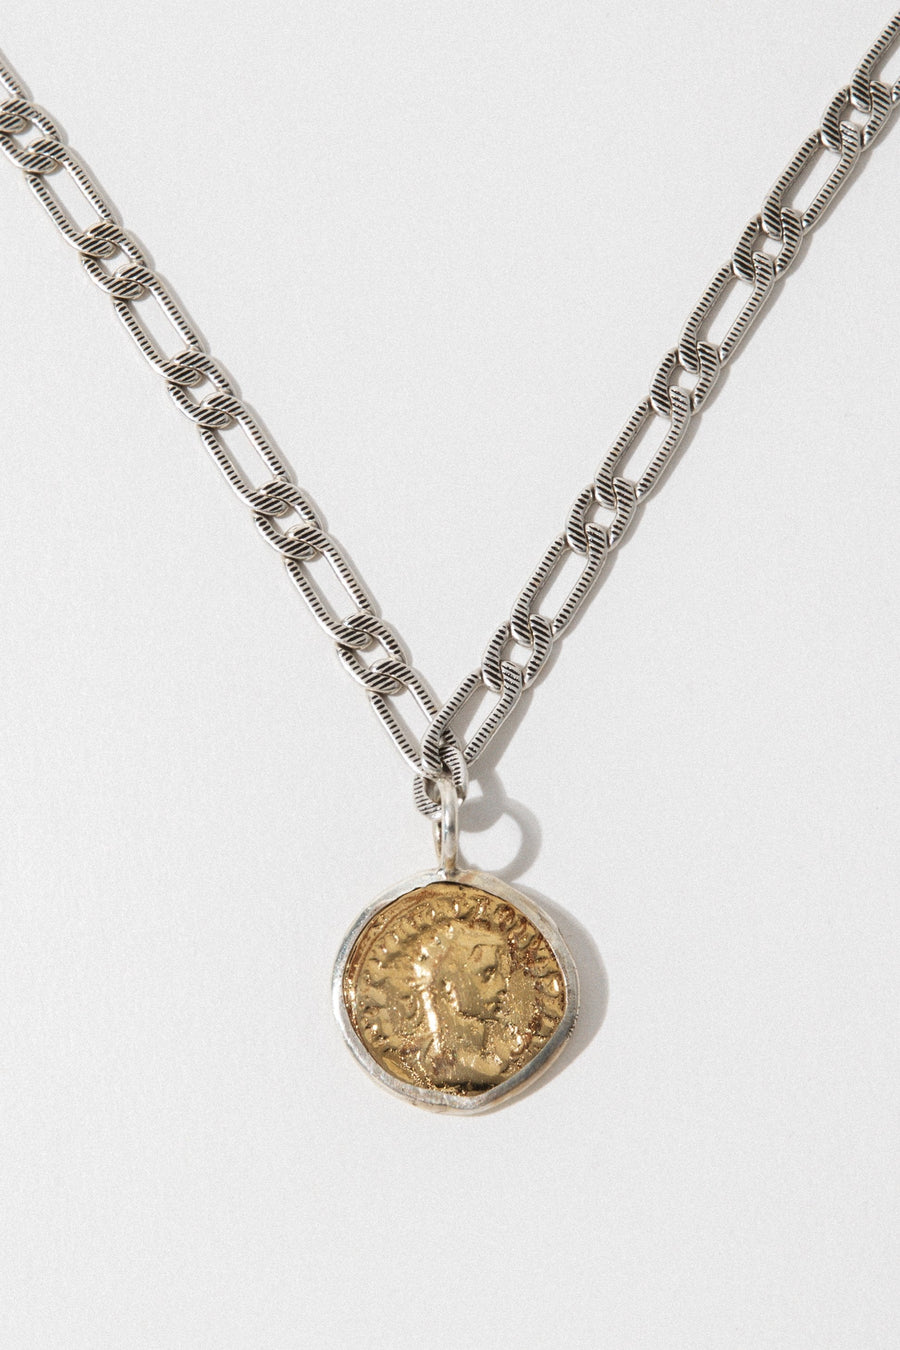 Goddess Jewelry Gold / 18 Inches Aurelian Coin Necklace